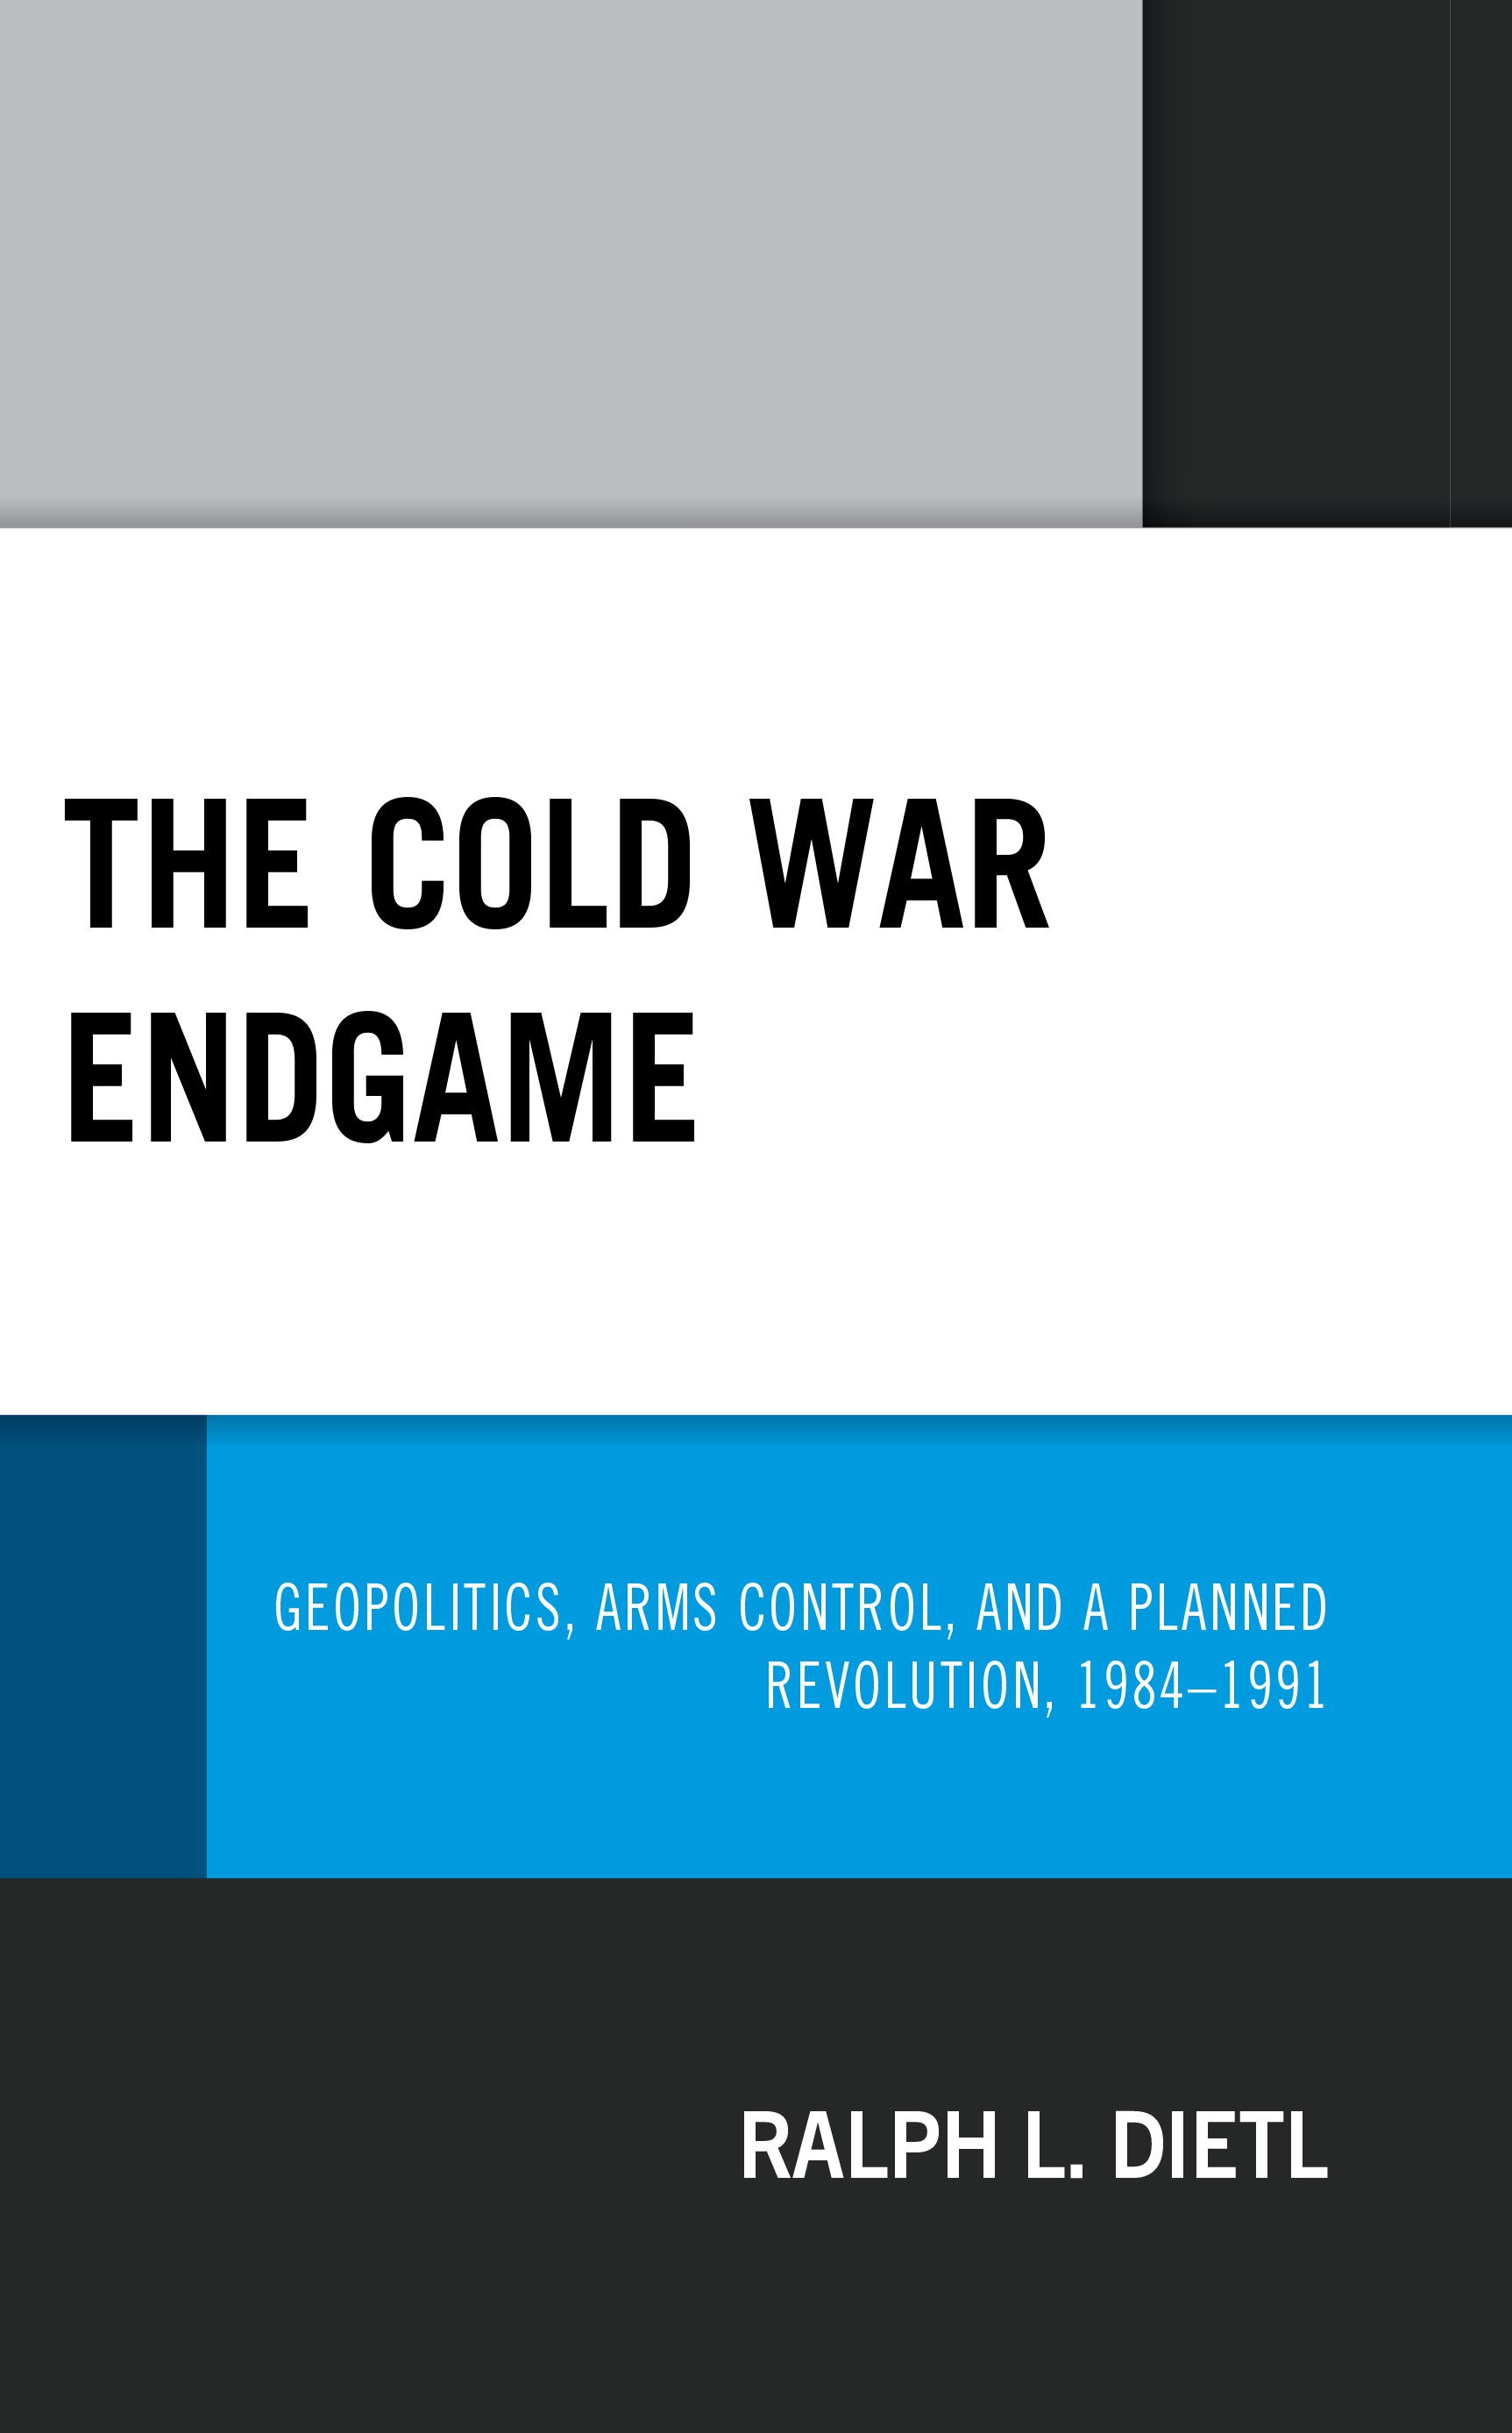 The Cold War Endgame: Geopolitics, Arms Control, and a Planned Revolution, 1984–1991